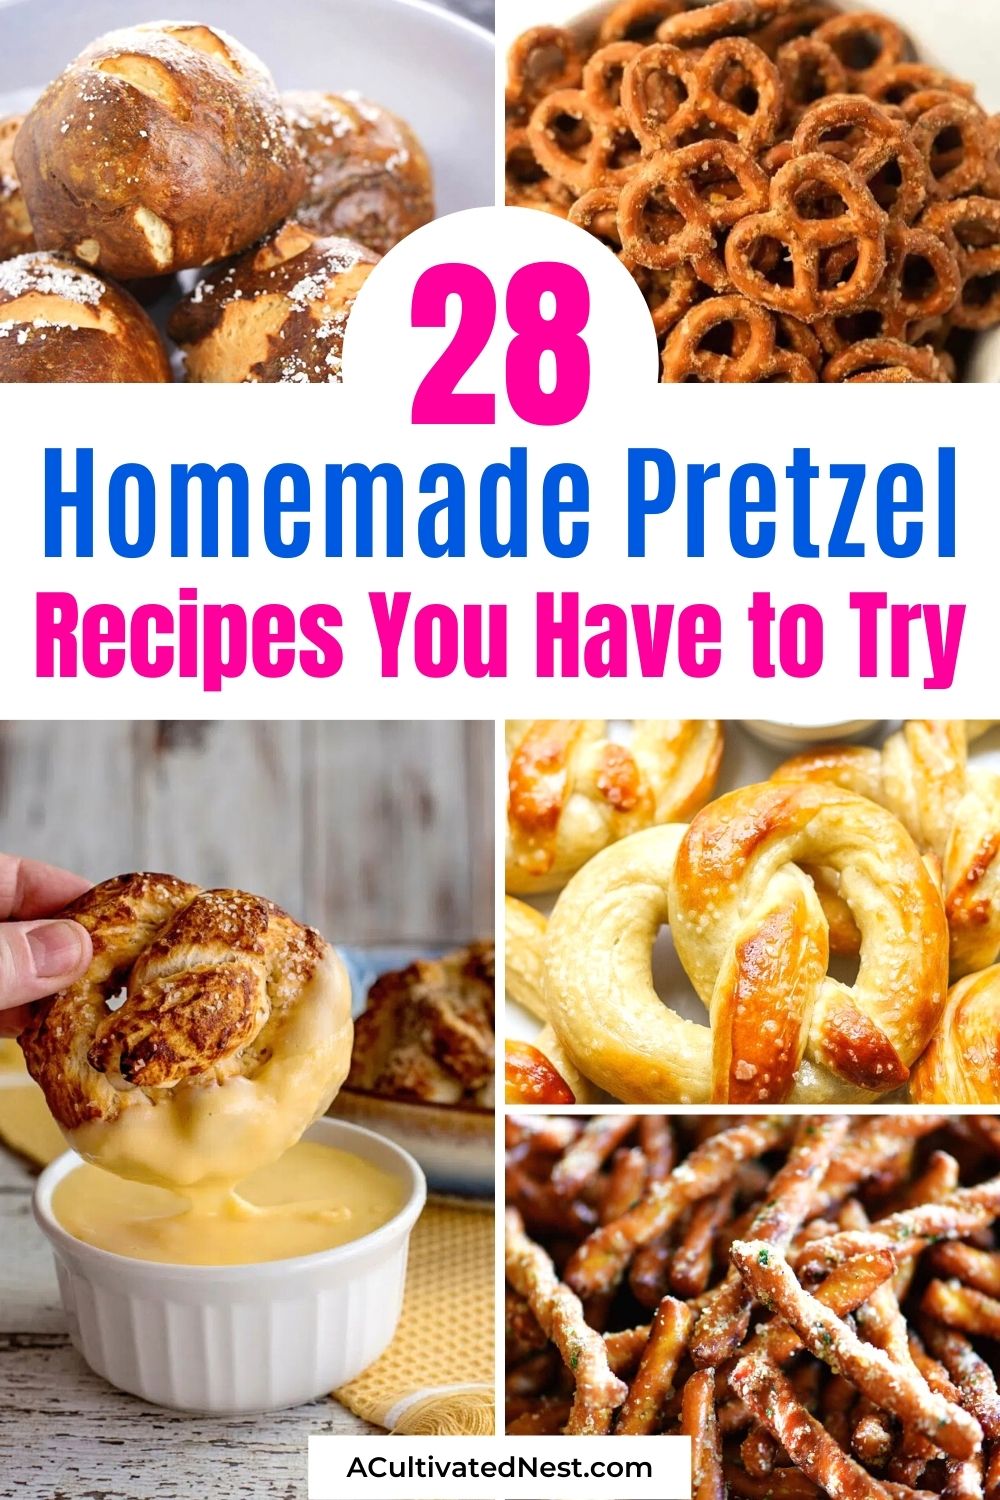 28 Homemade Pretzel Recipes You Have to Try- These homemade pretzel recipes are surprisingly easy to make and taste delicious! And there are so many different hard and soft pretzels you can make at home! | #pretzels #homemadePretzels #snackRecipes #homemadeSnacks #ACultivatedNest